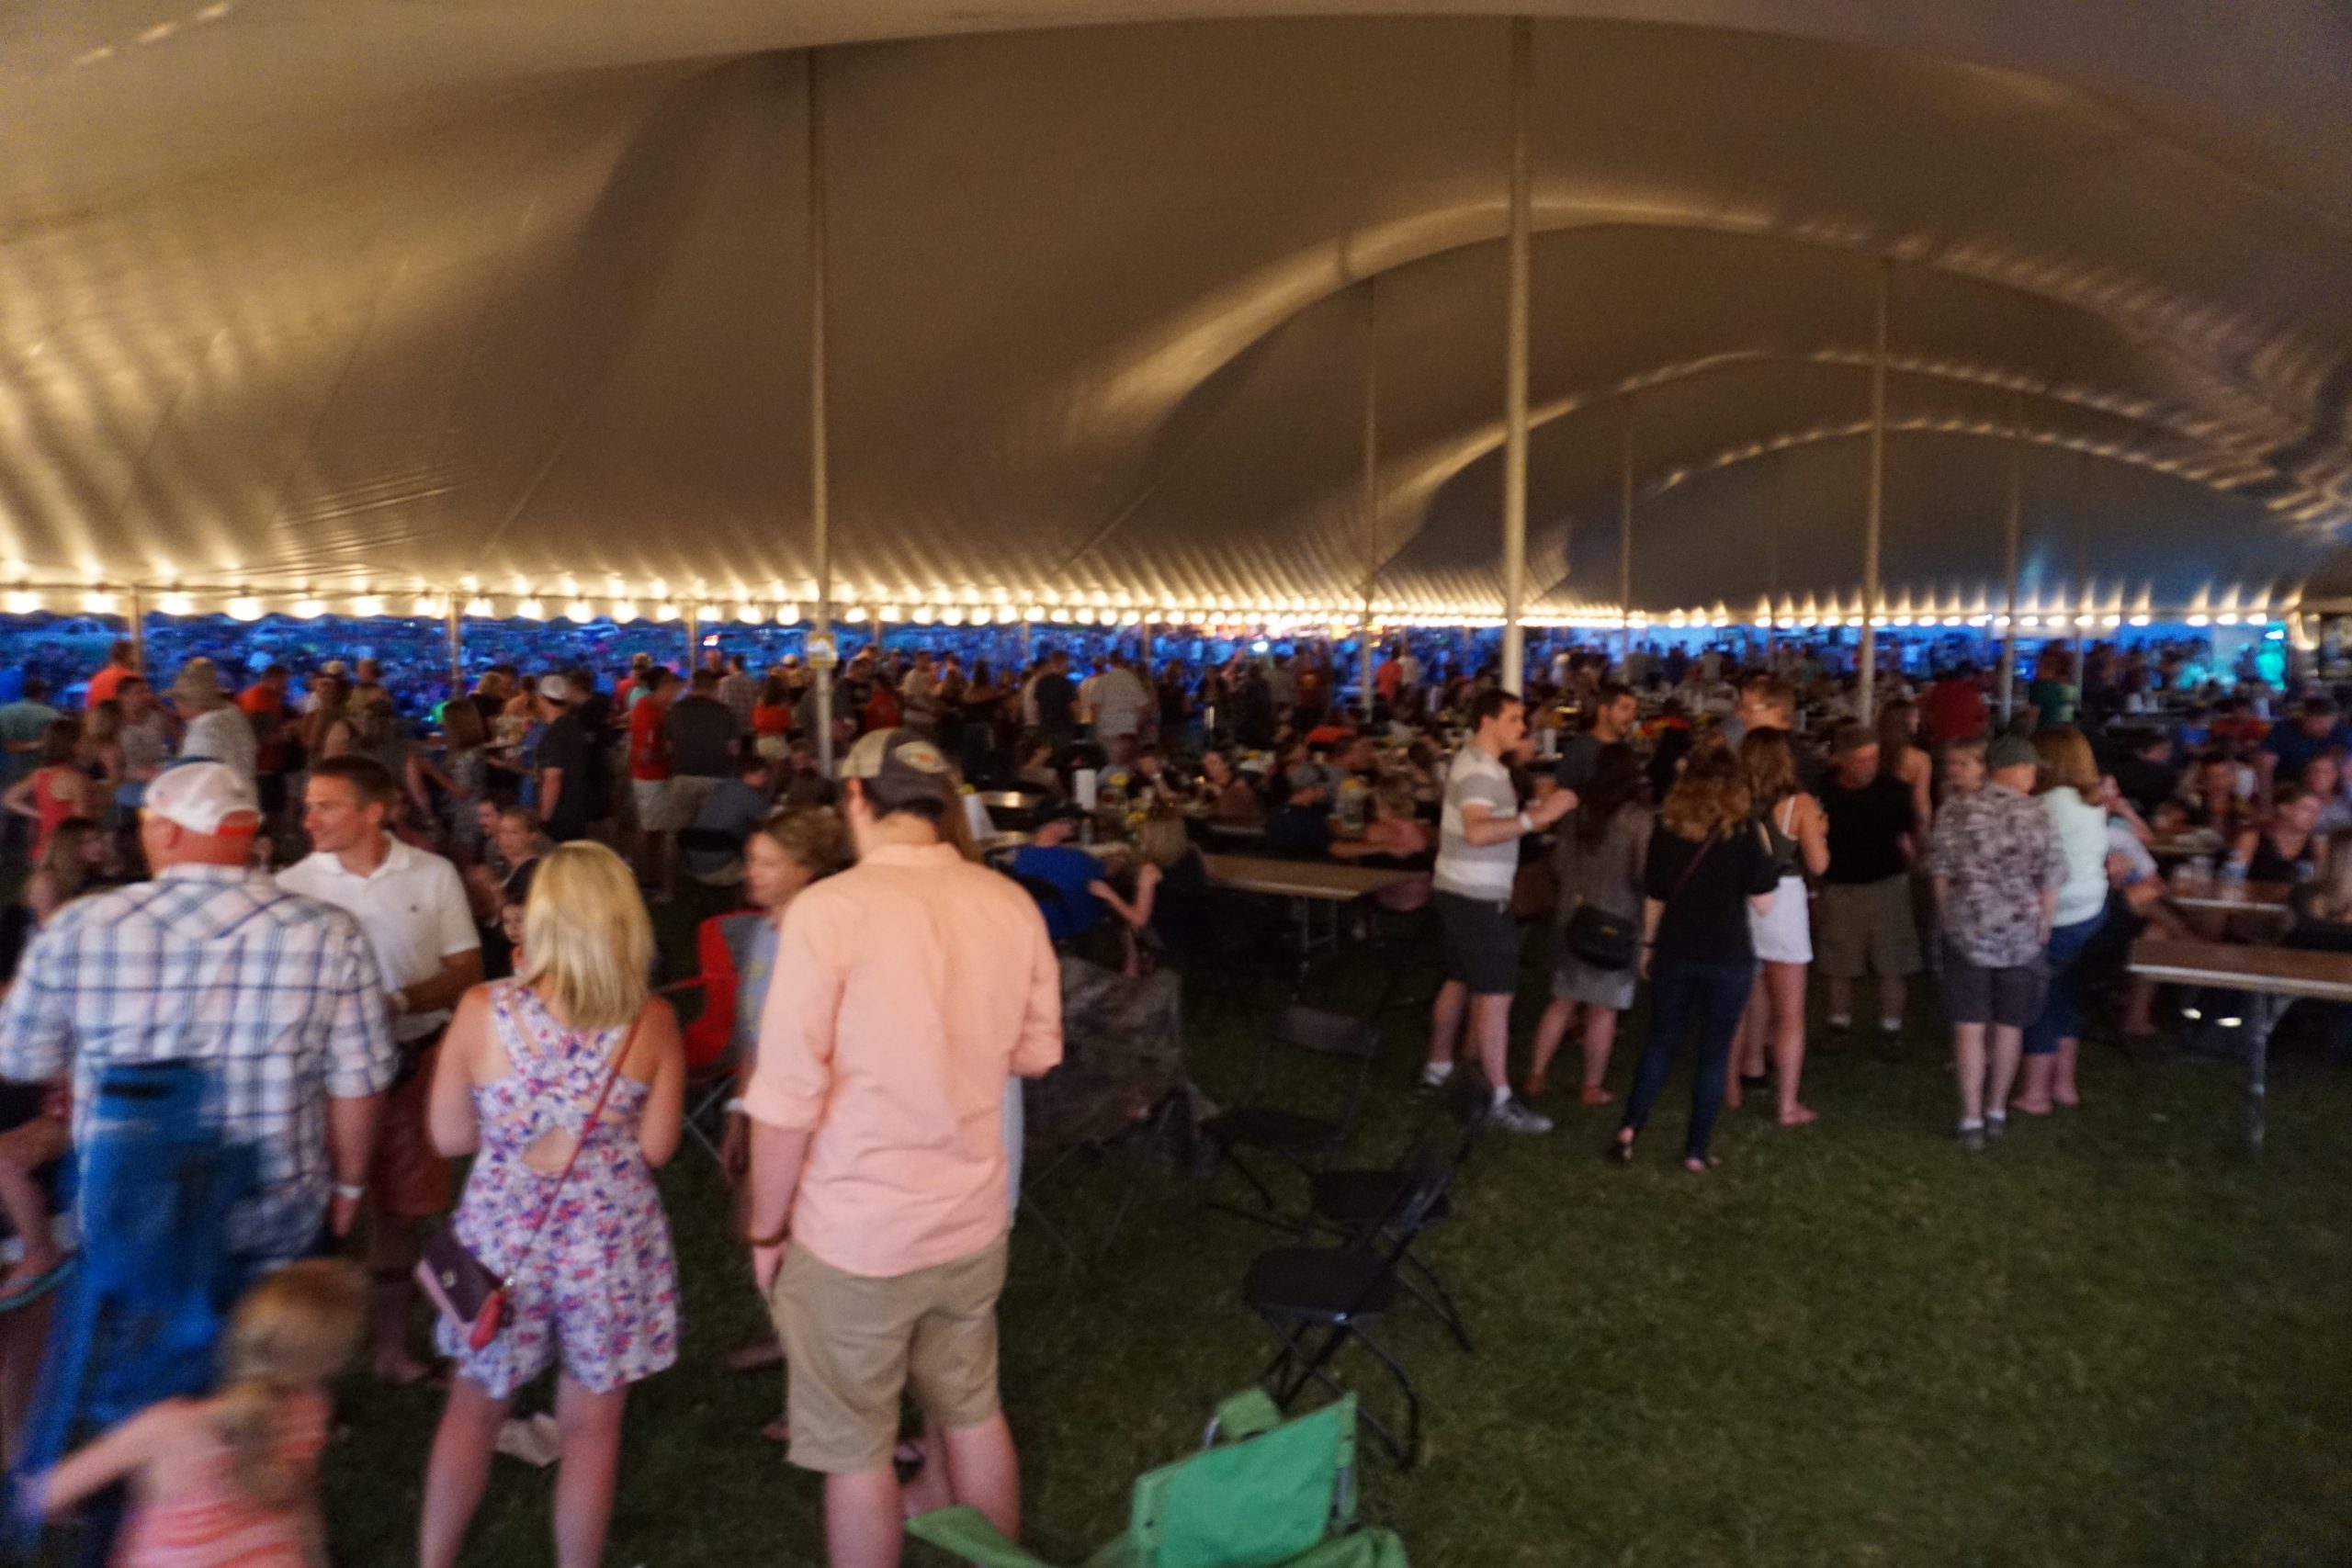 People under the 60′ x 150′ “twin pole” Legend rope and pole tent at Blues and BBQ in North Libery, Iowa